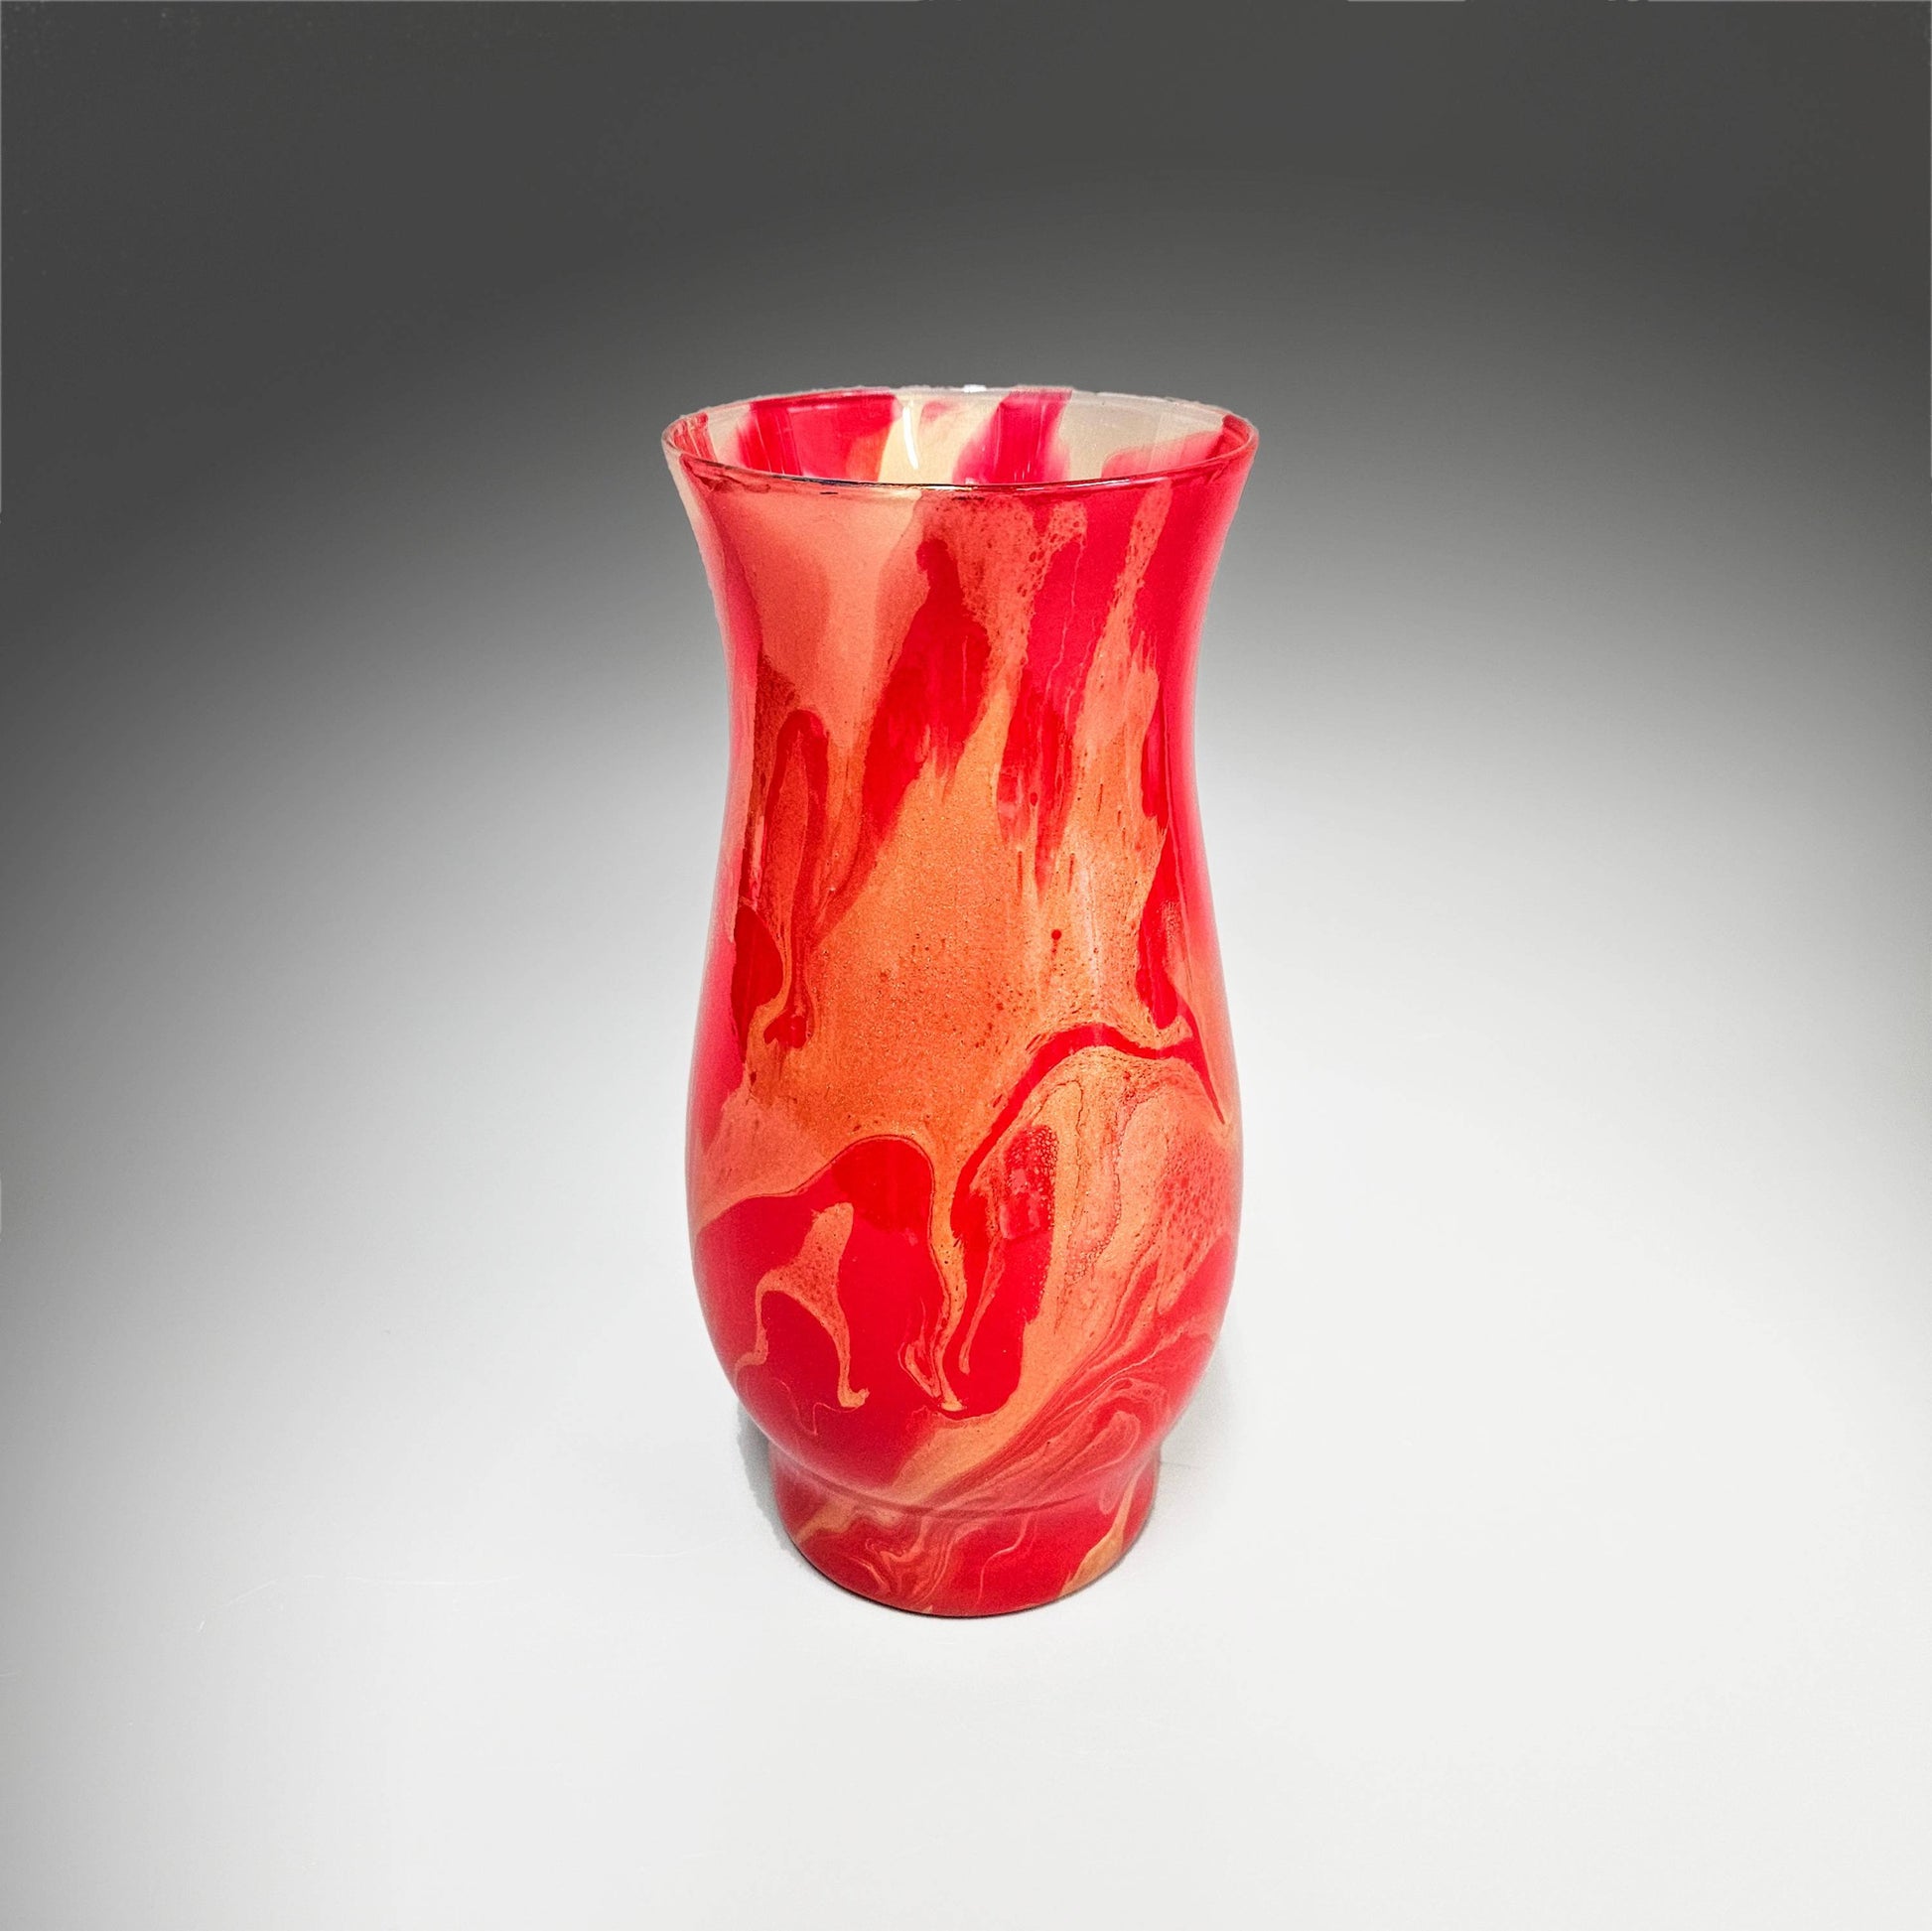 Painted Glass Vase in Red and Metallic Gold | Fluid Art Gift Ideas